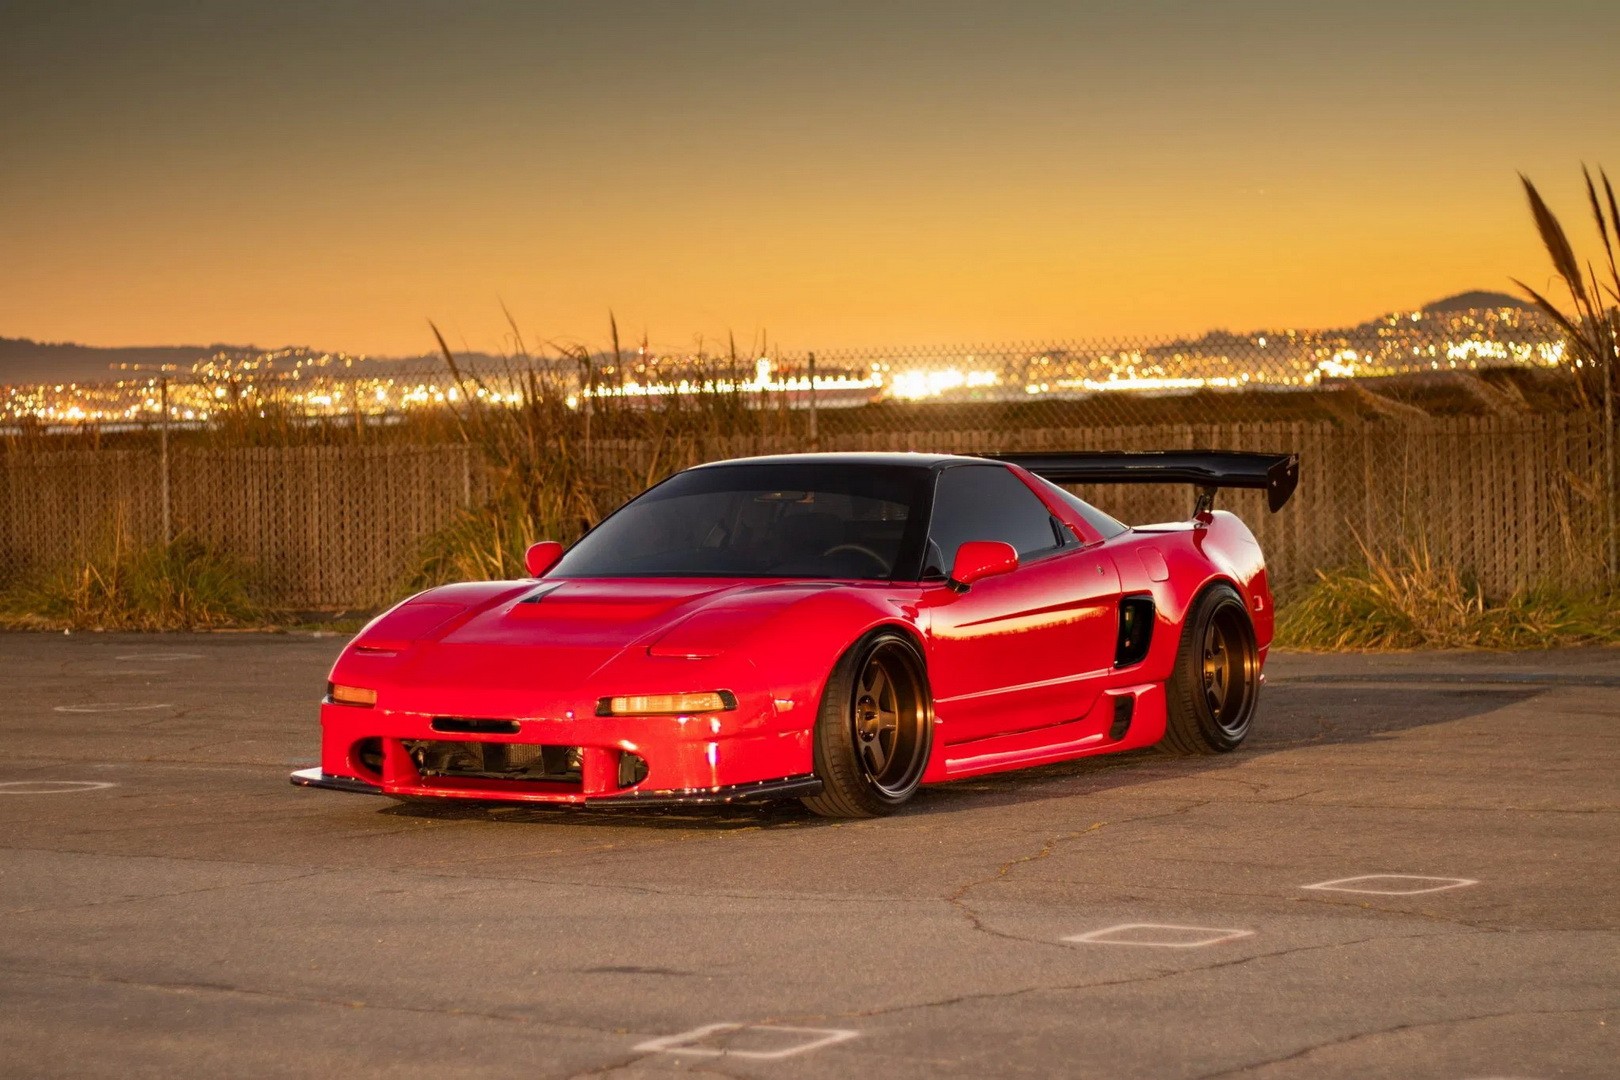 Slammed Widebody 1991 Acura NSX Is a Genuine One-Off With Fast ...